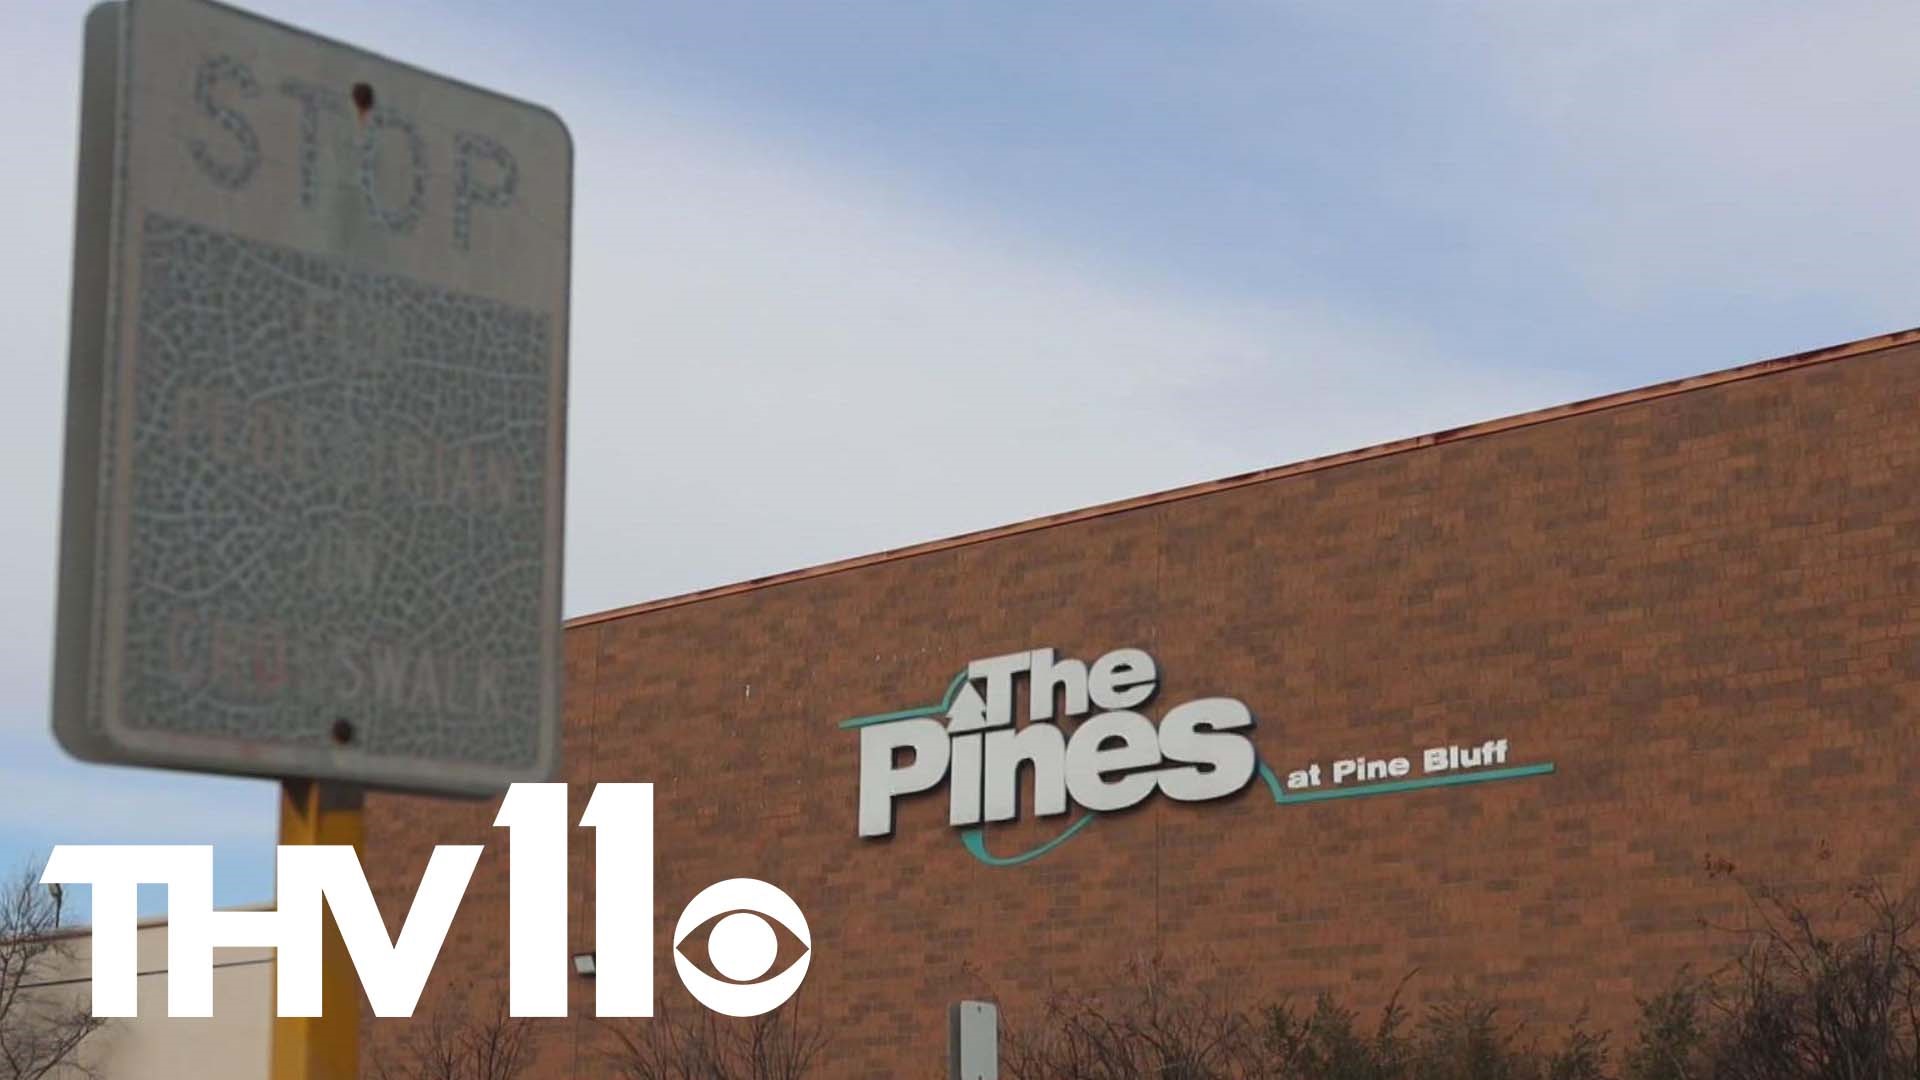 The Pines Mall in Pine Bluff has been a big part of the community for generations, but a fire badly damaged the mall on Thursday.